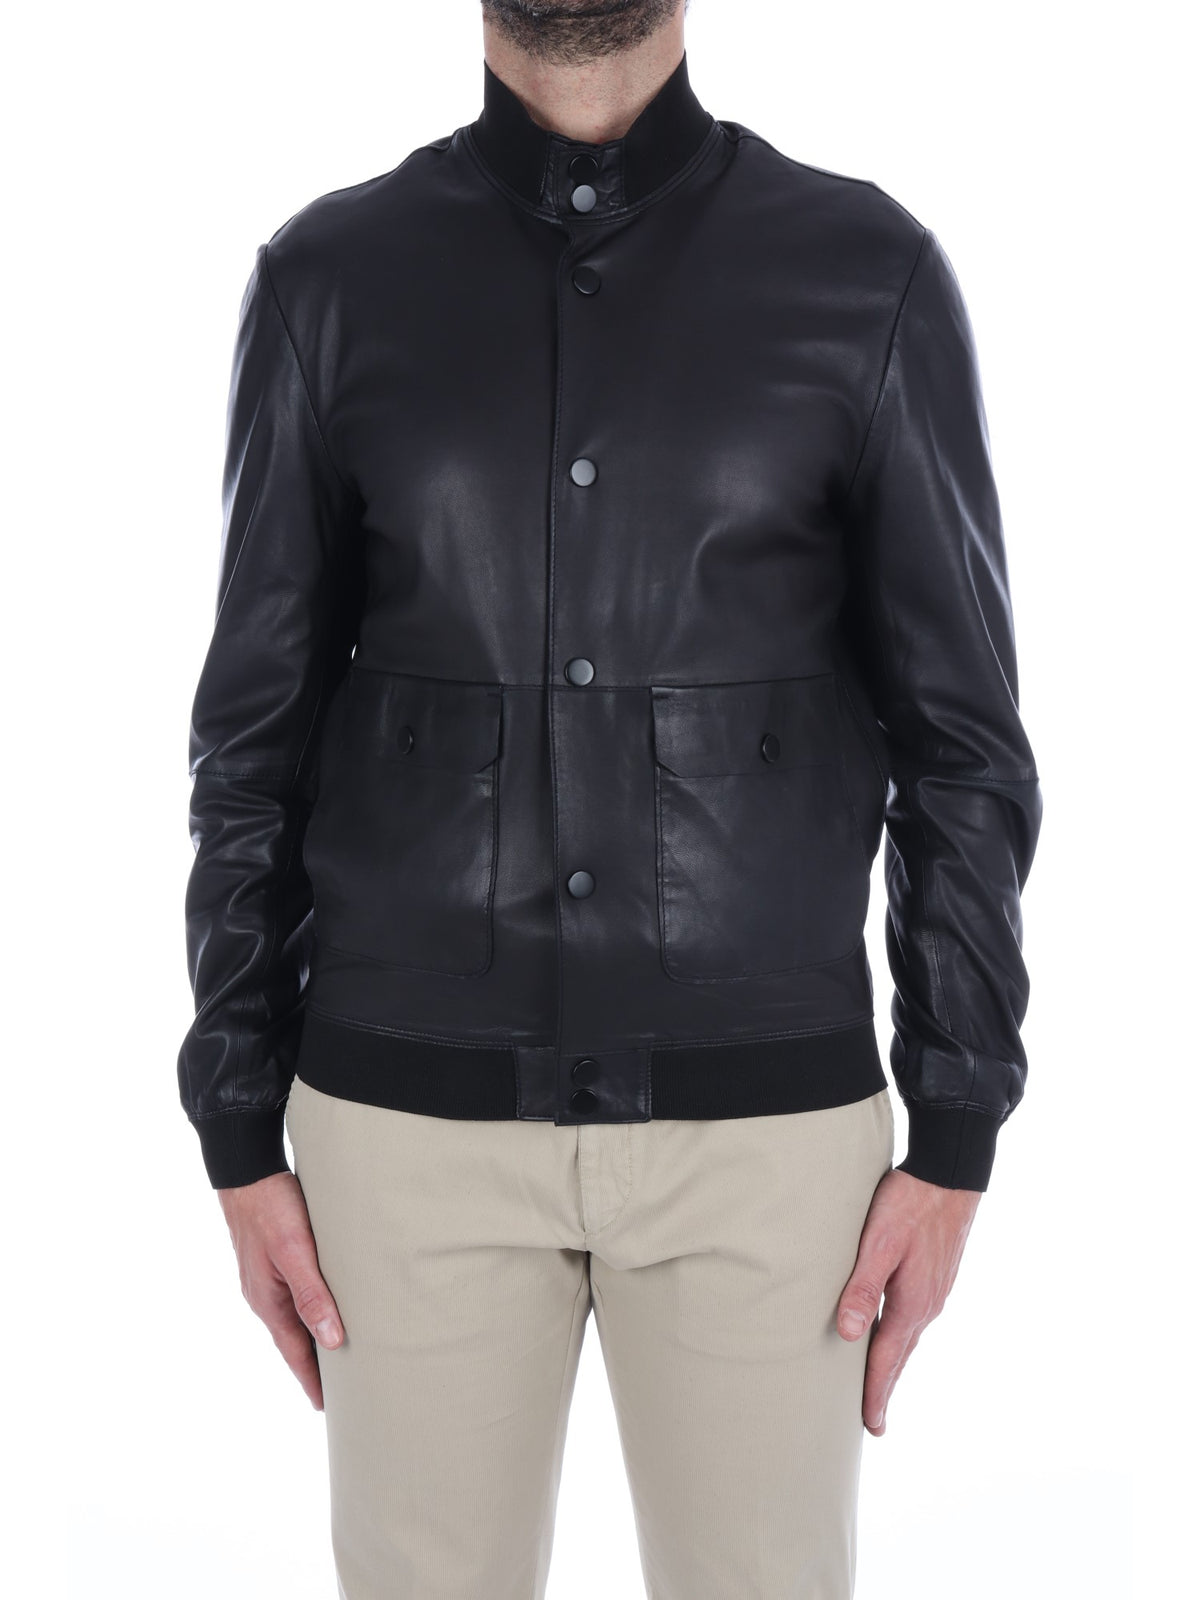 The Jack Leathers giacca in pelle da uomo